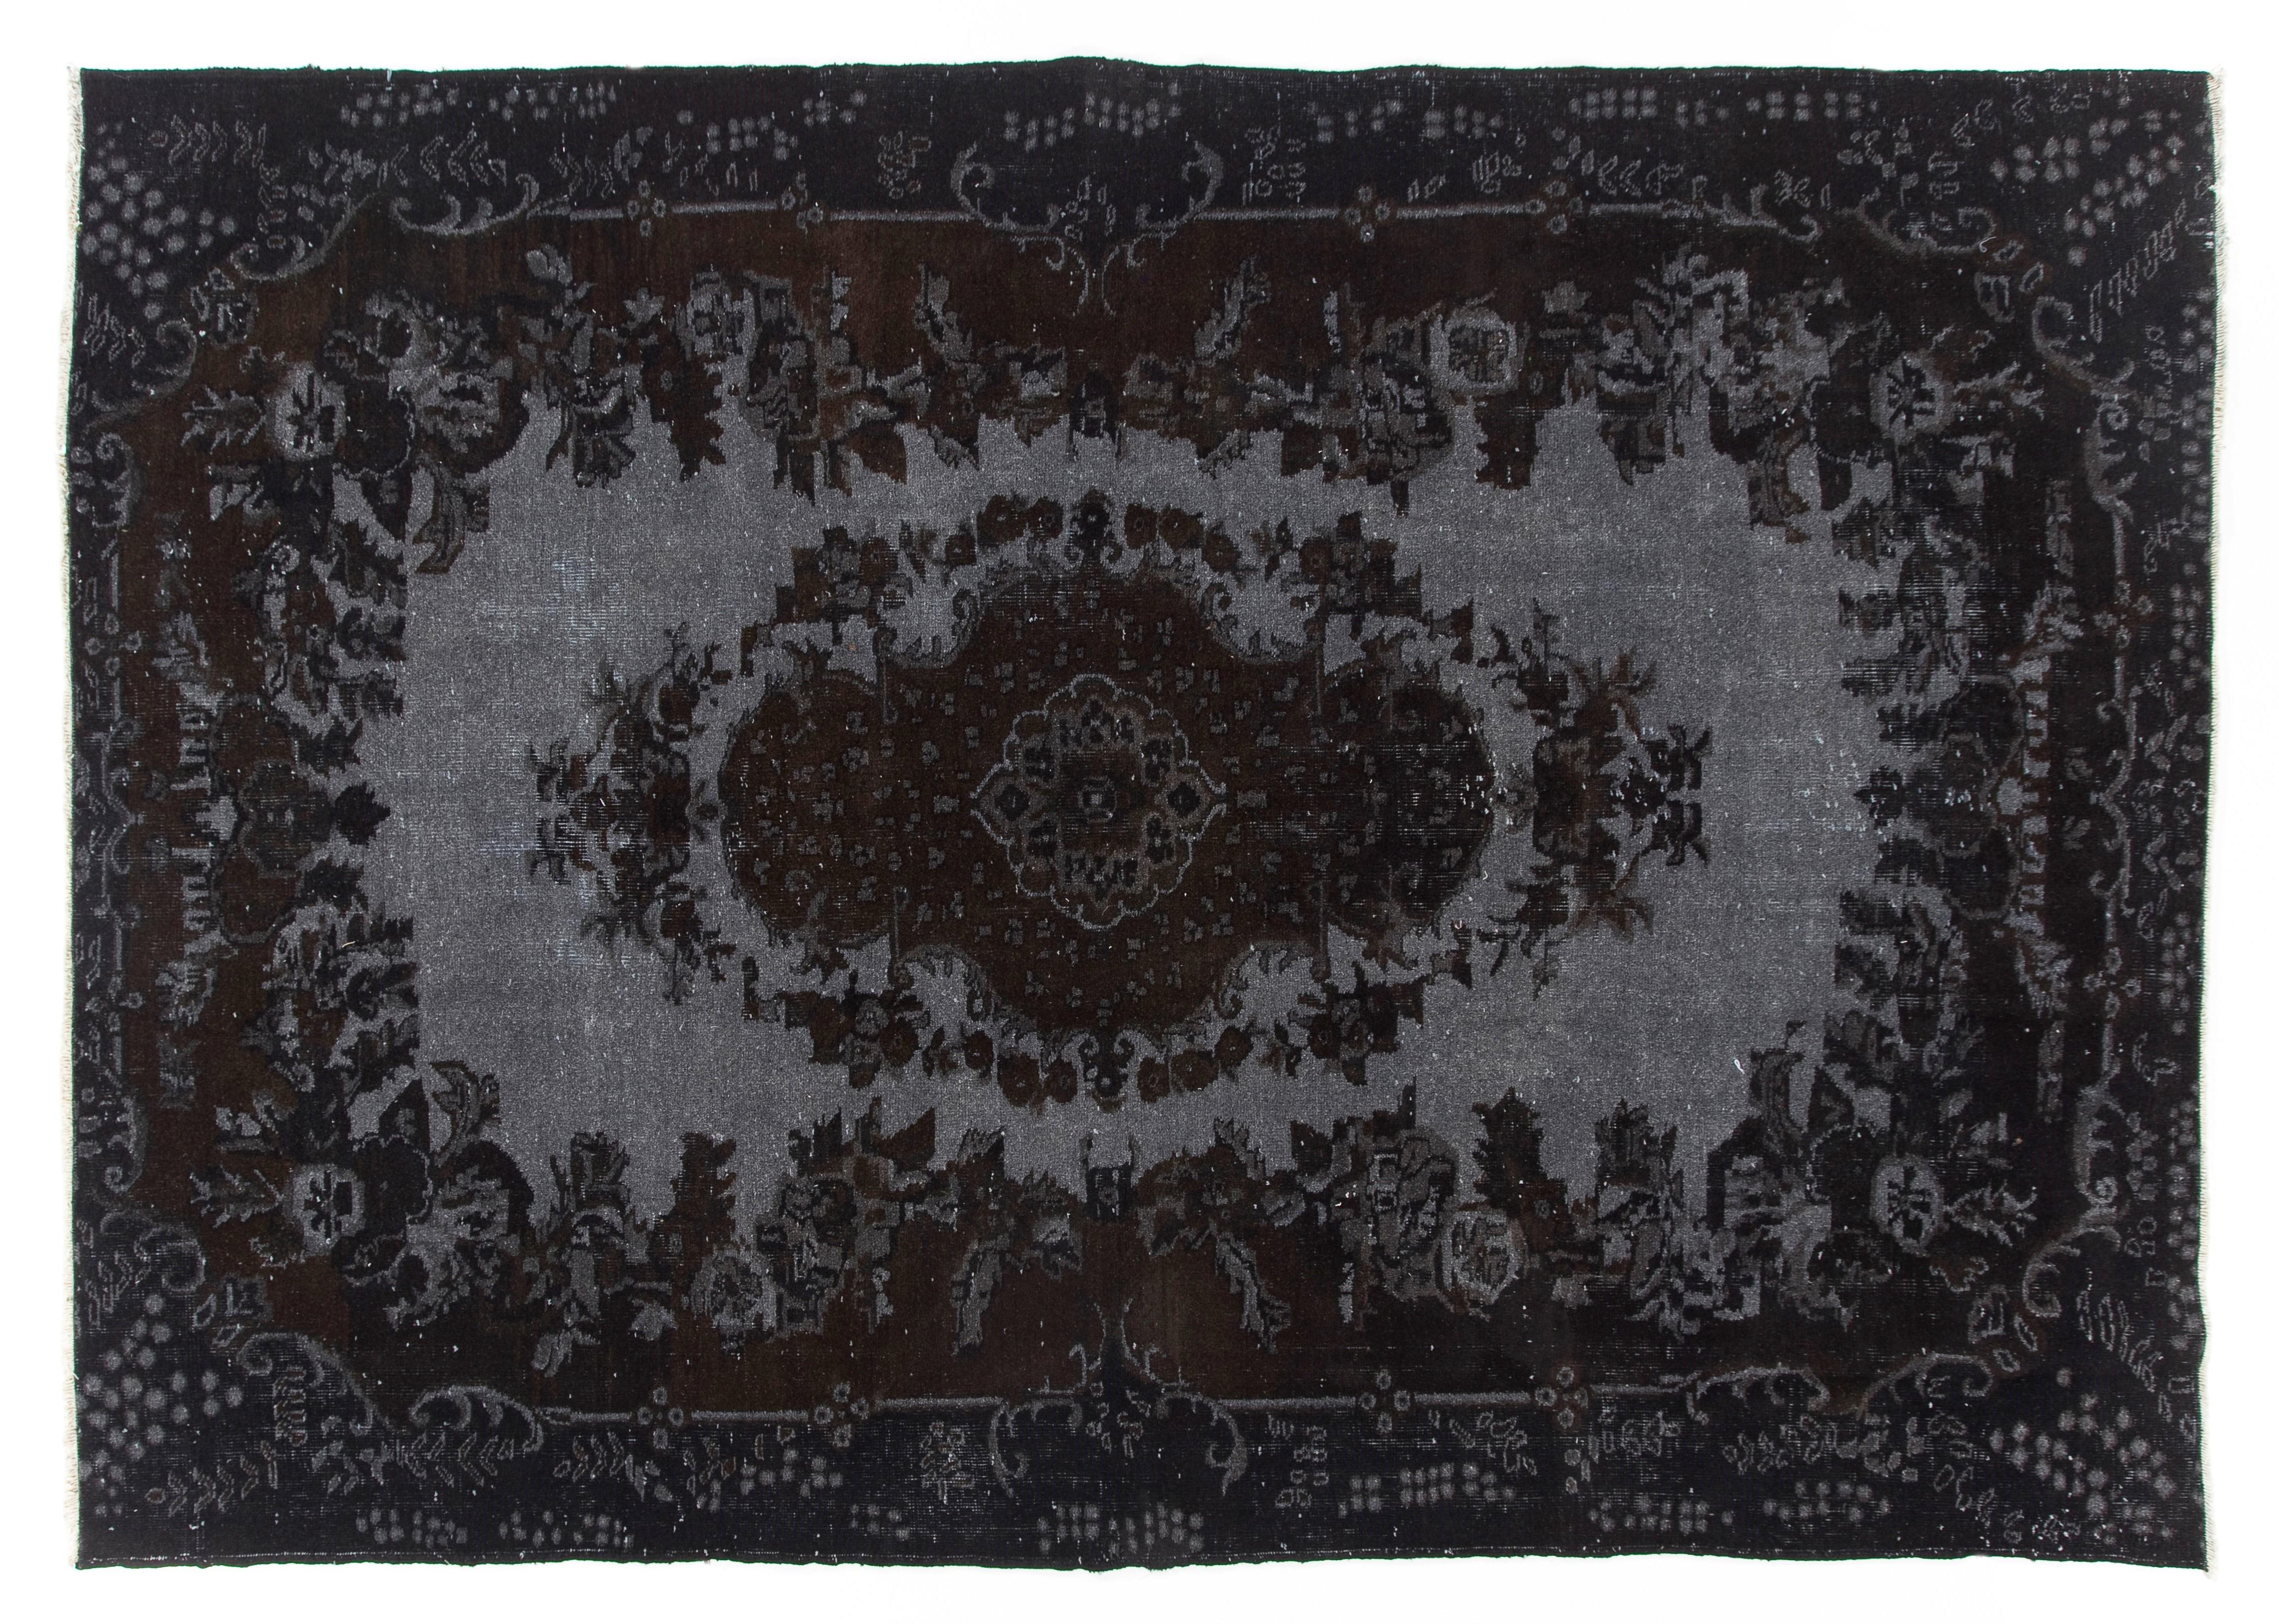 A vintage Turkish area rug re-dyed in black color for contemporary interiors.
Finely hand knotted, low wool pile on cotton foundation. Professionally washed.
Sturdy and can be used on a high traffic area, suitable for both residential and commercial